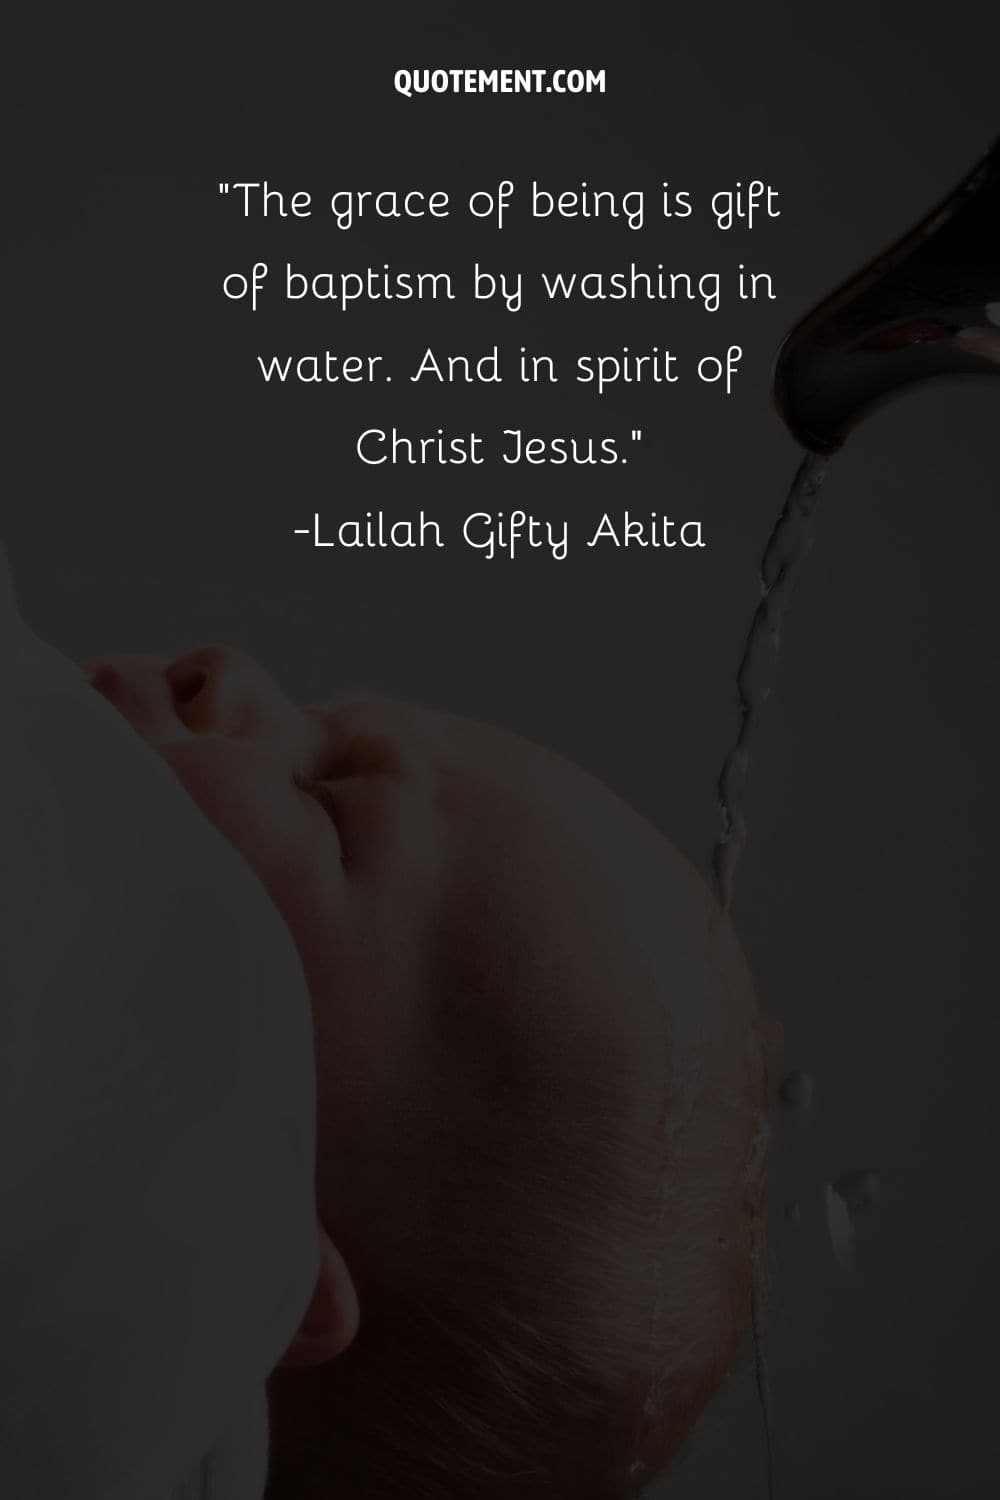 baby's head being gently watered during a baptism representing the most beautiful baptism quote